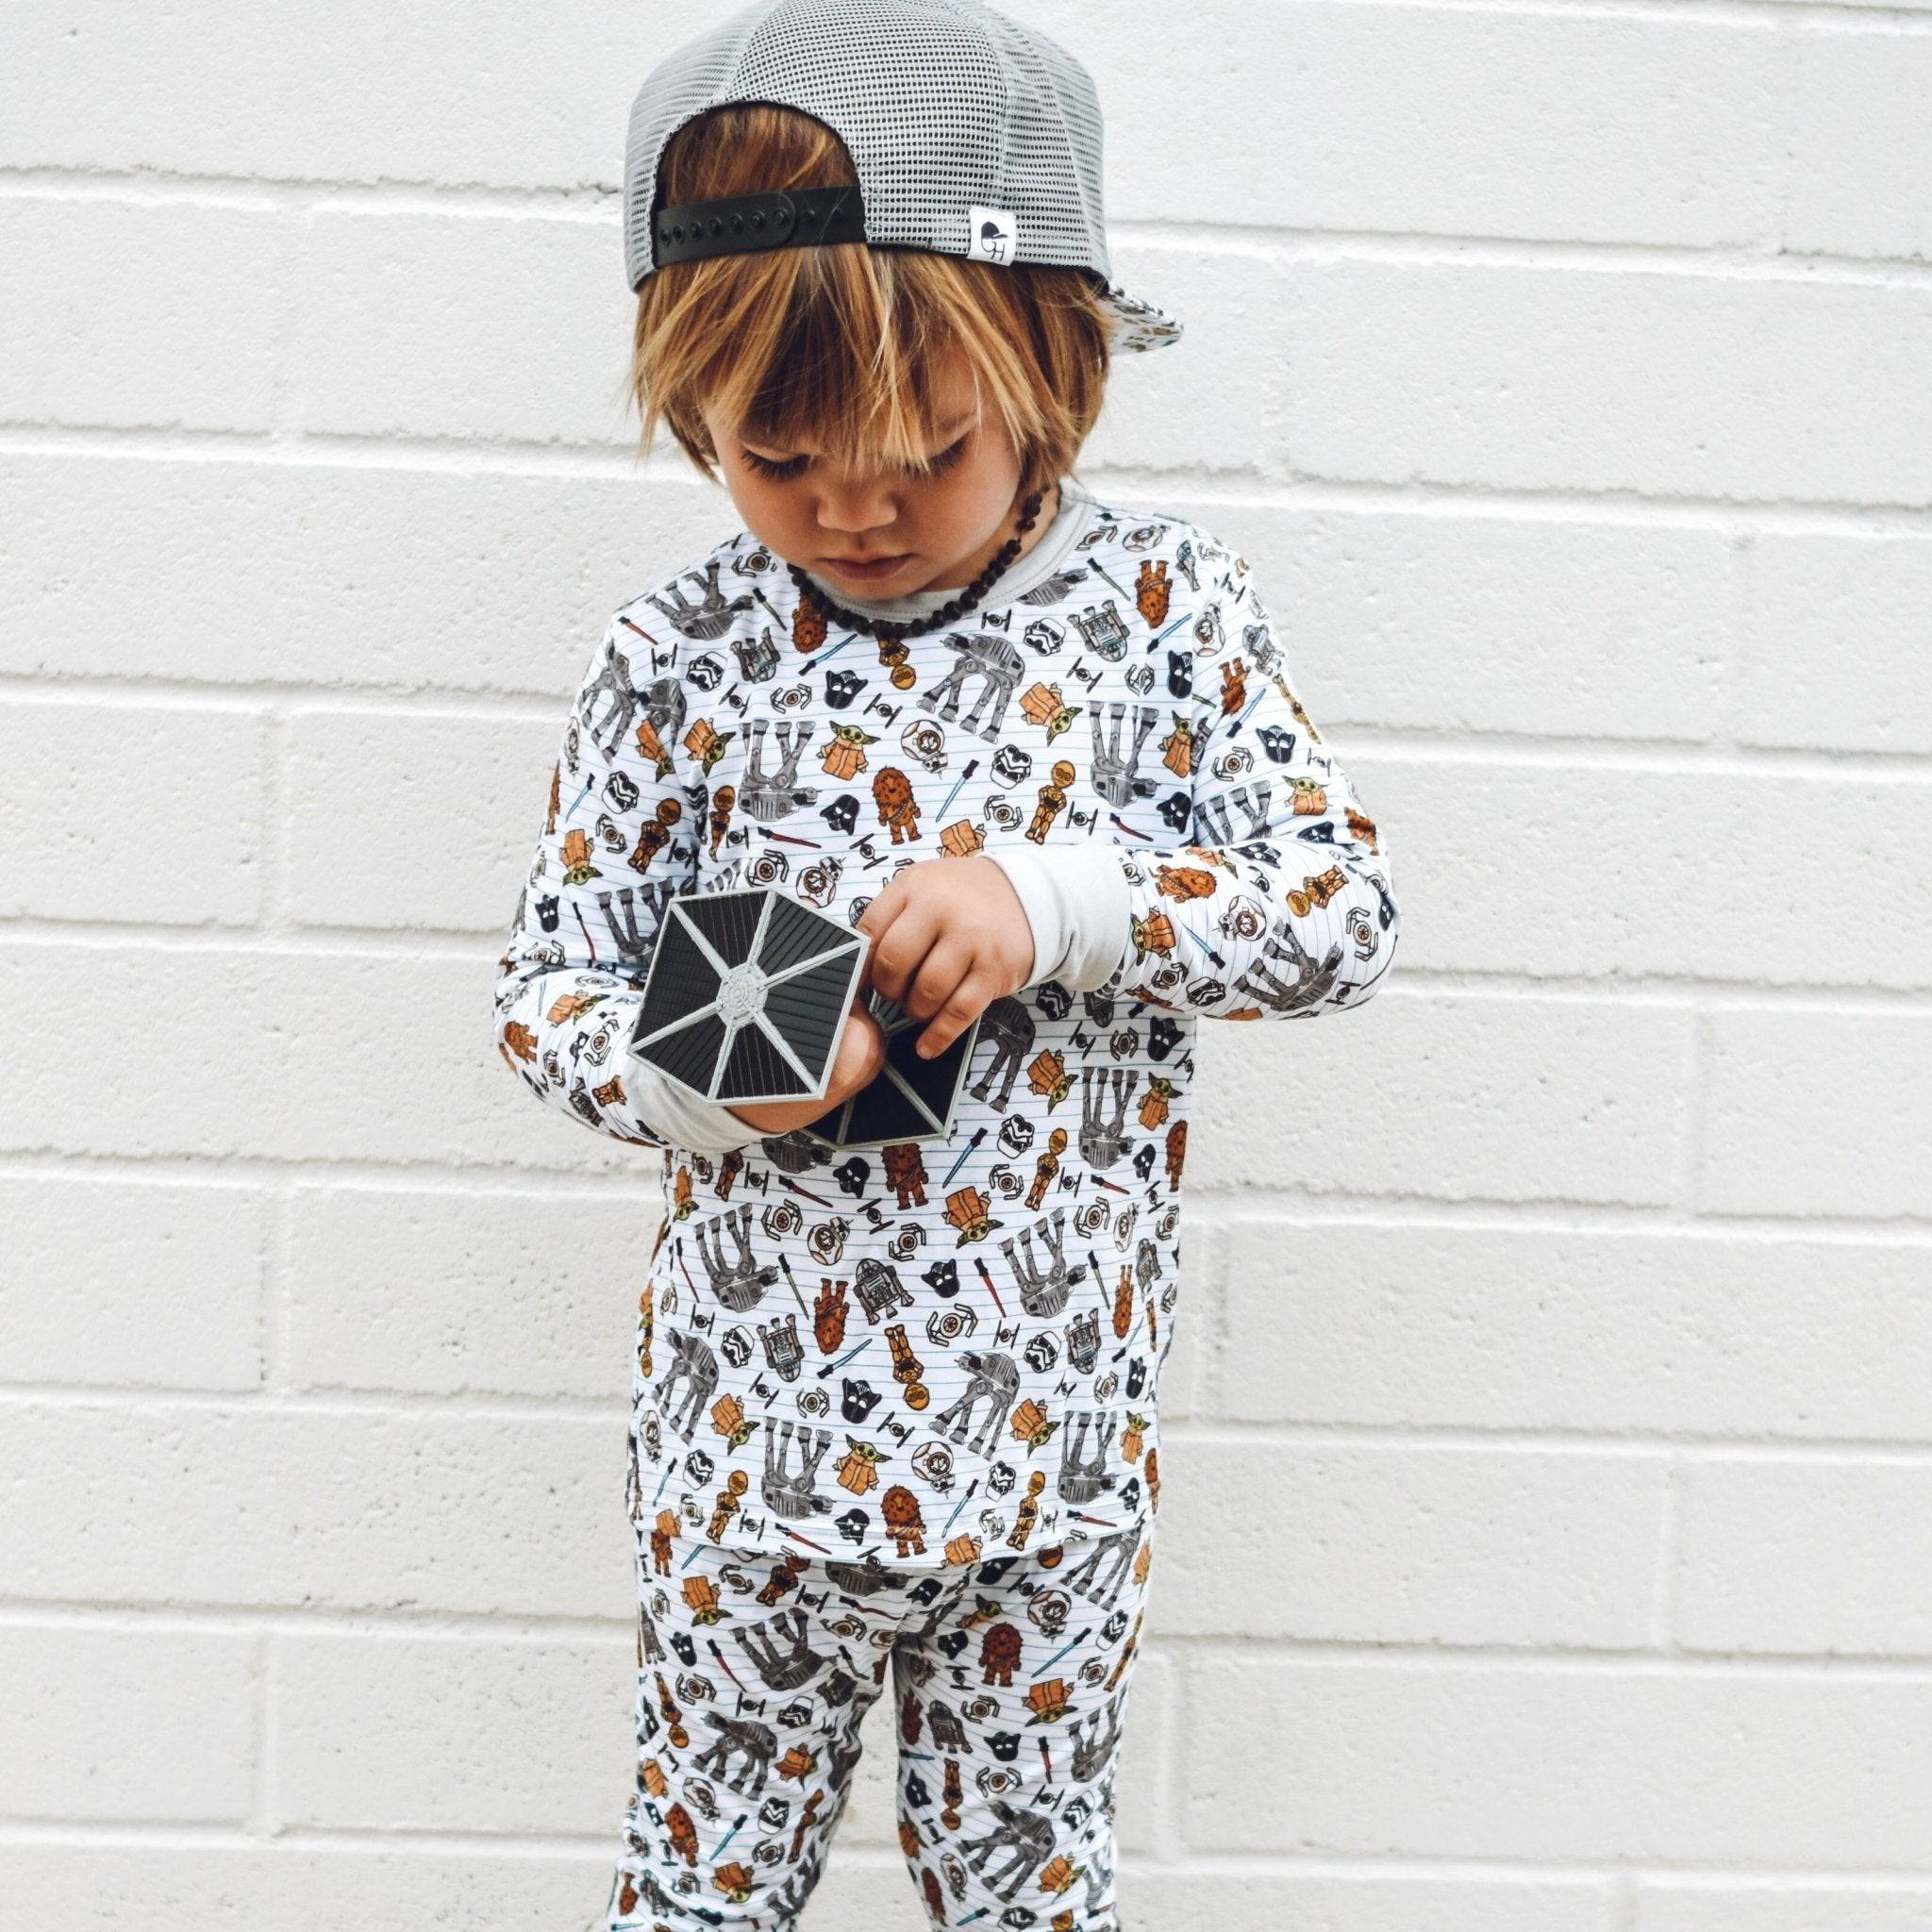 White Rainbow Star Thermal Two Piece Pjs